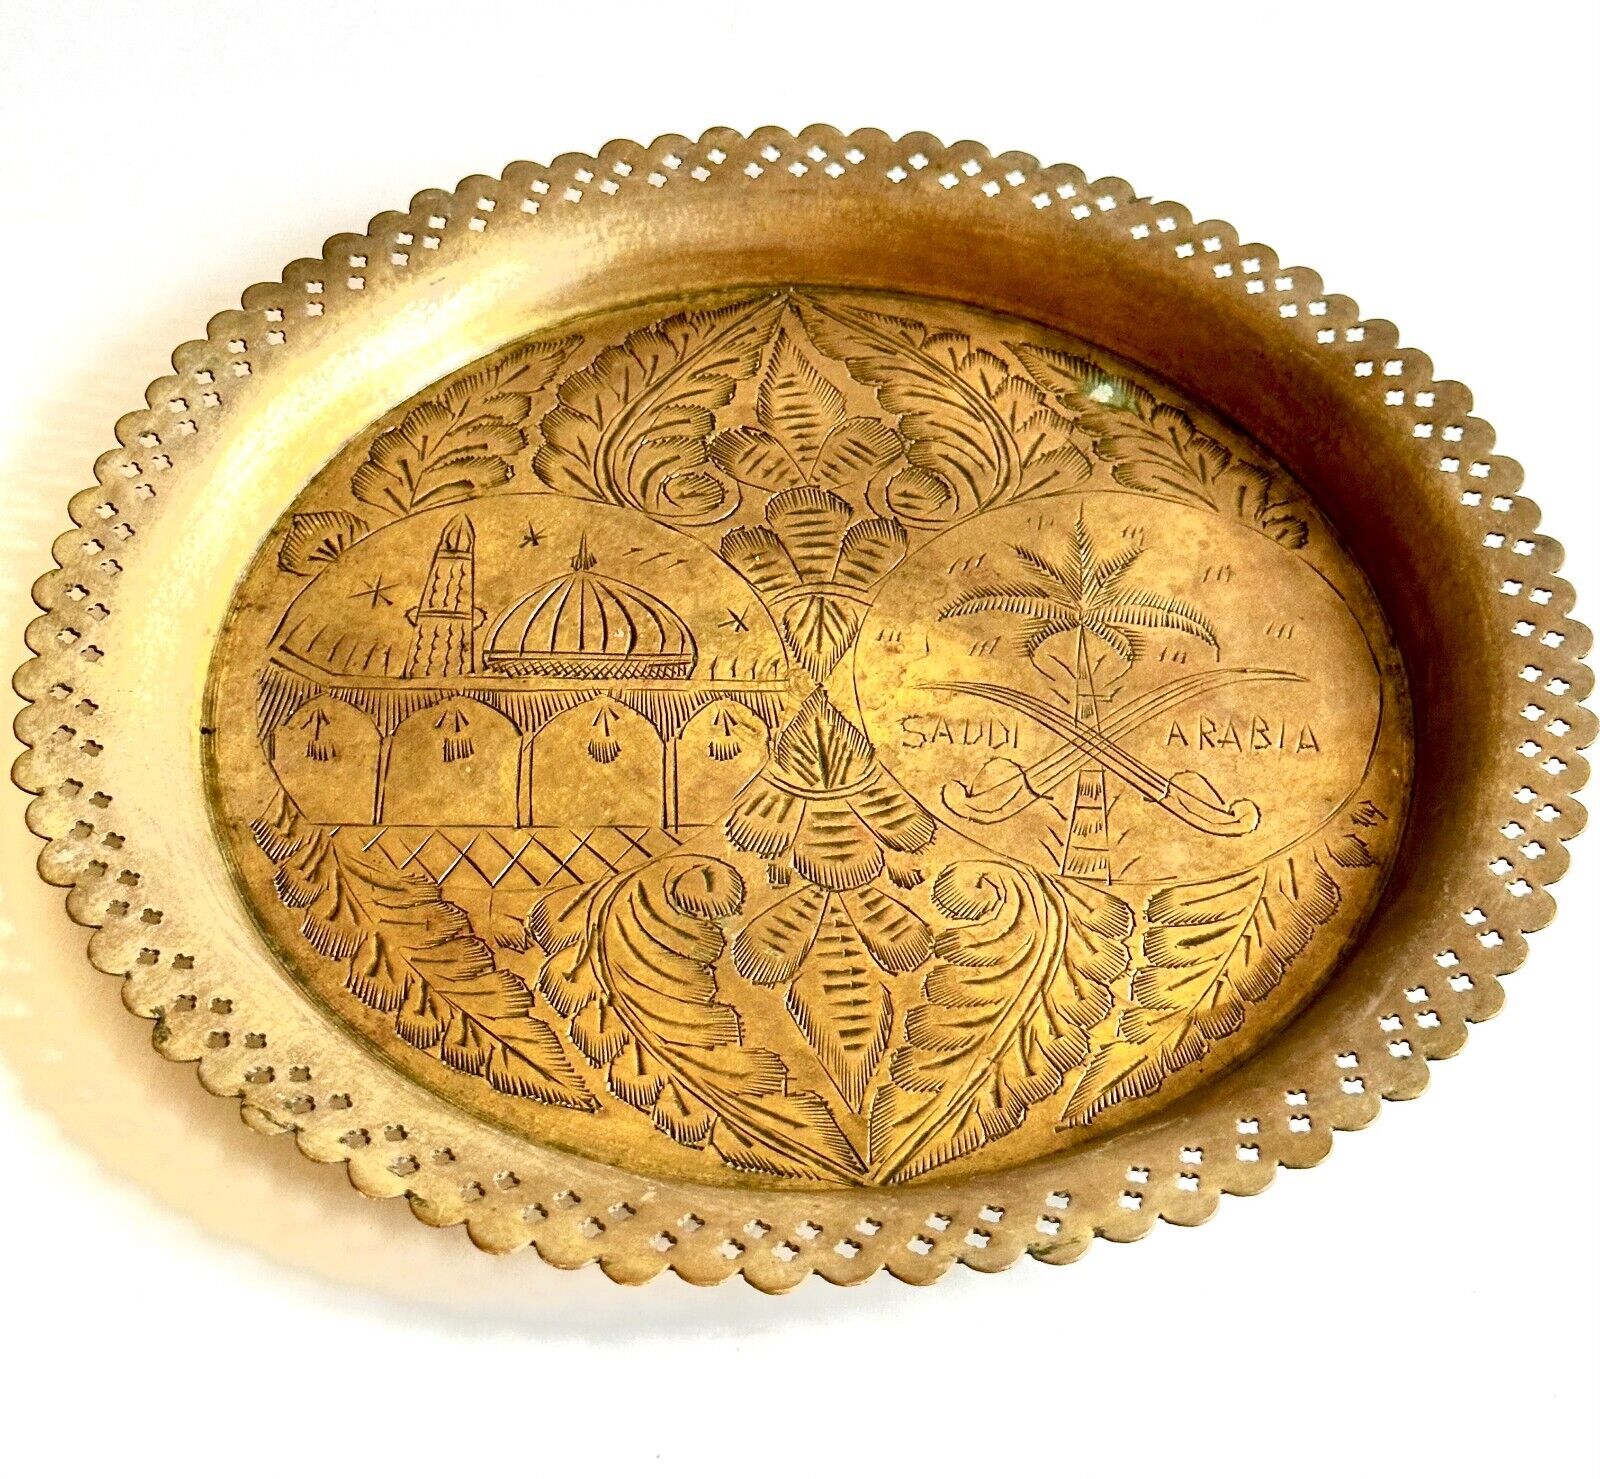 Vintage Brass Islamic Tray Saudia Arabia Etched Engraved 10\